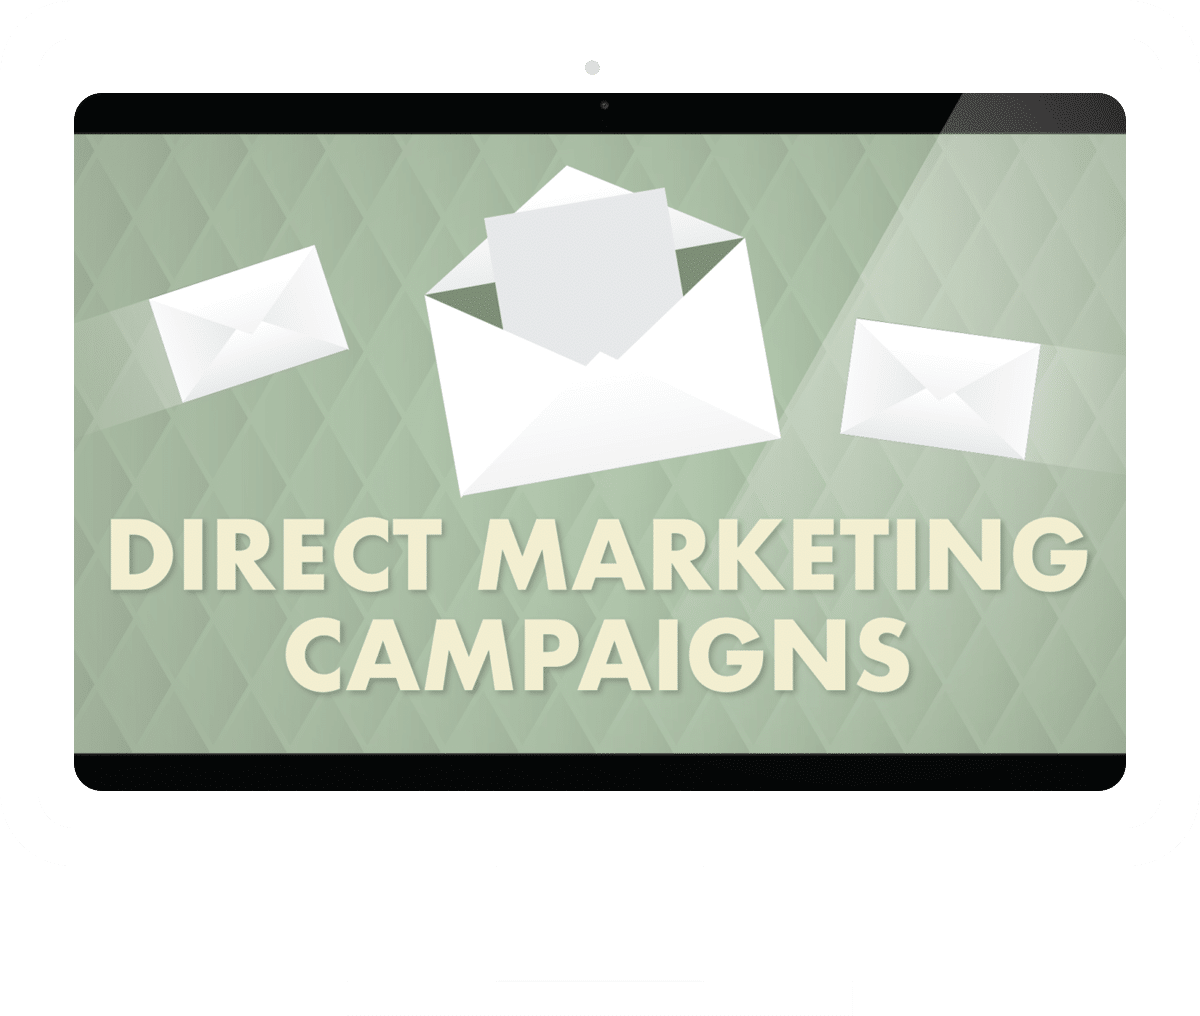 Desktop Monitor Graphic with Direct Marketing Campaigns